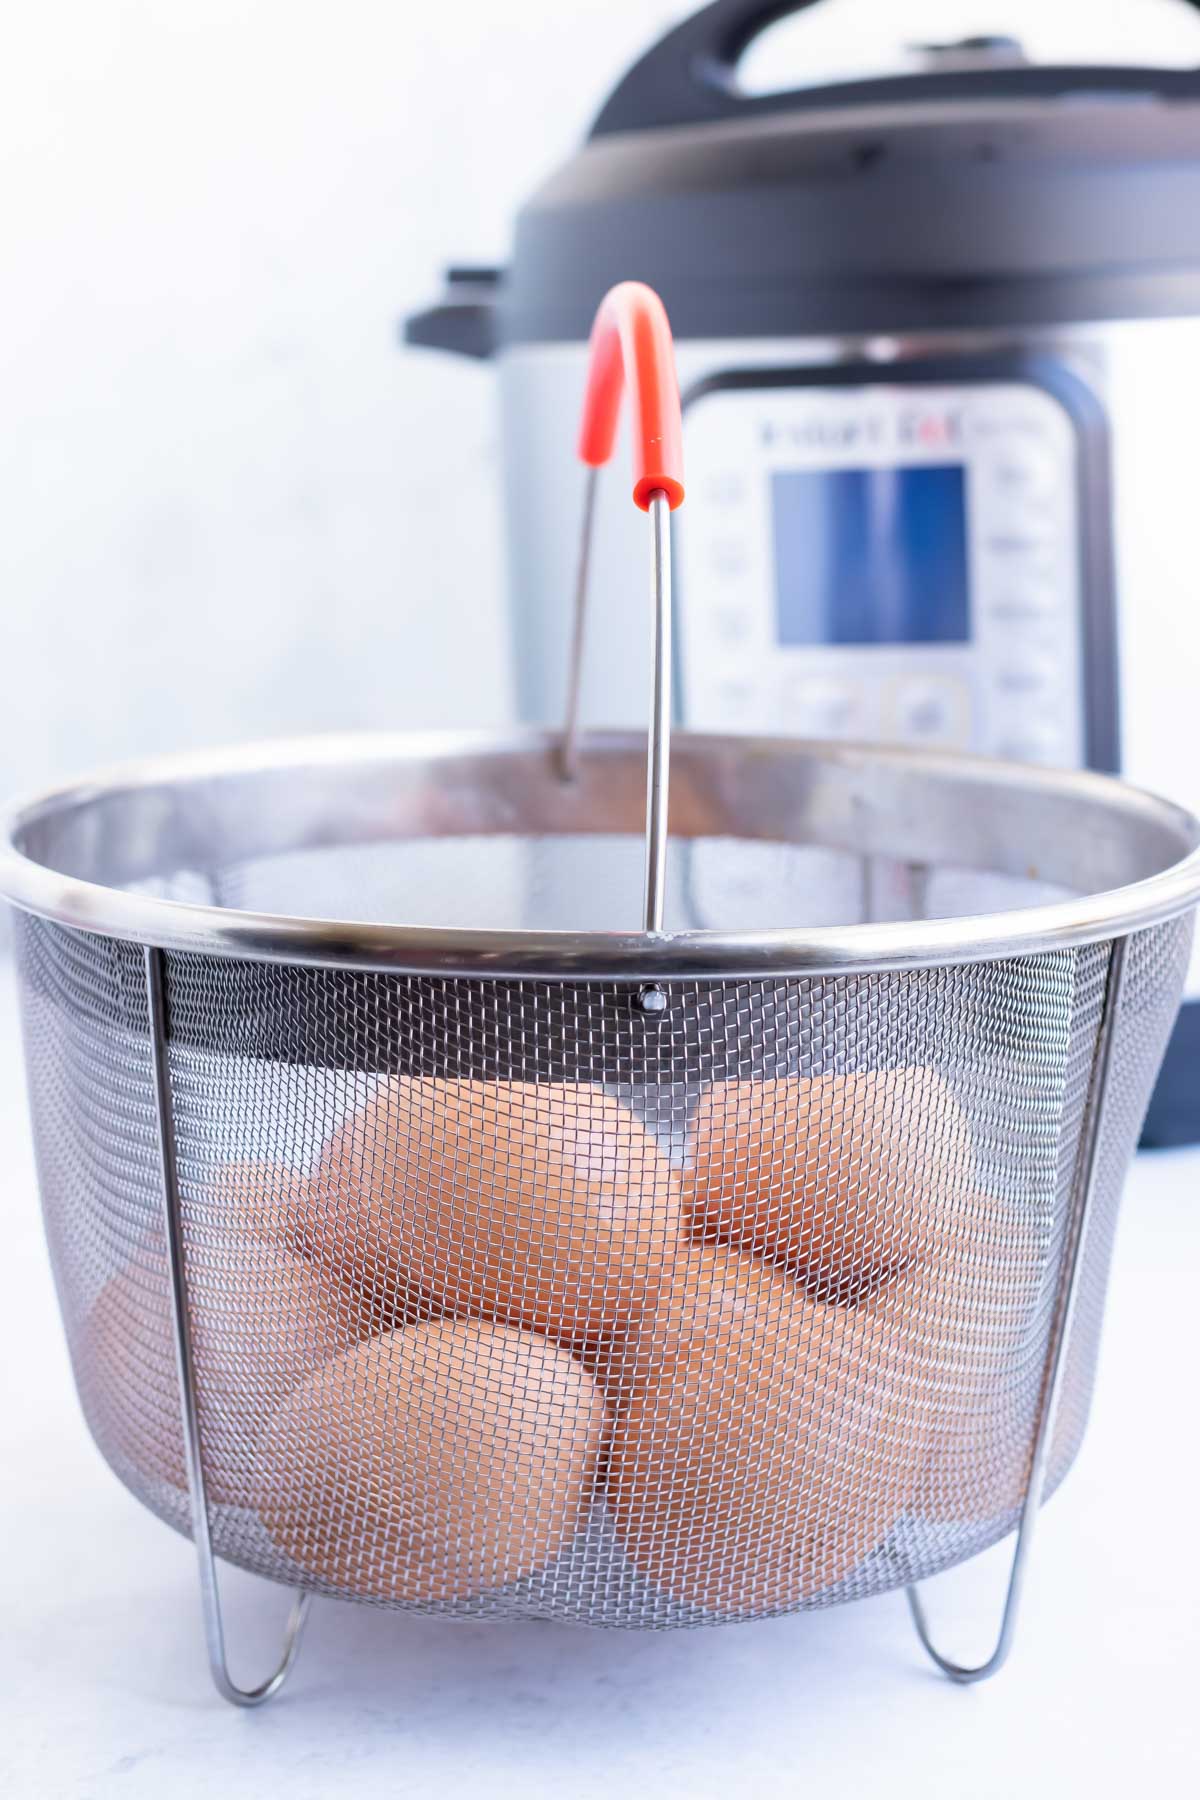 A steamer basket filled with eggs to make hard-boiled eggs.